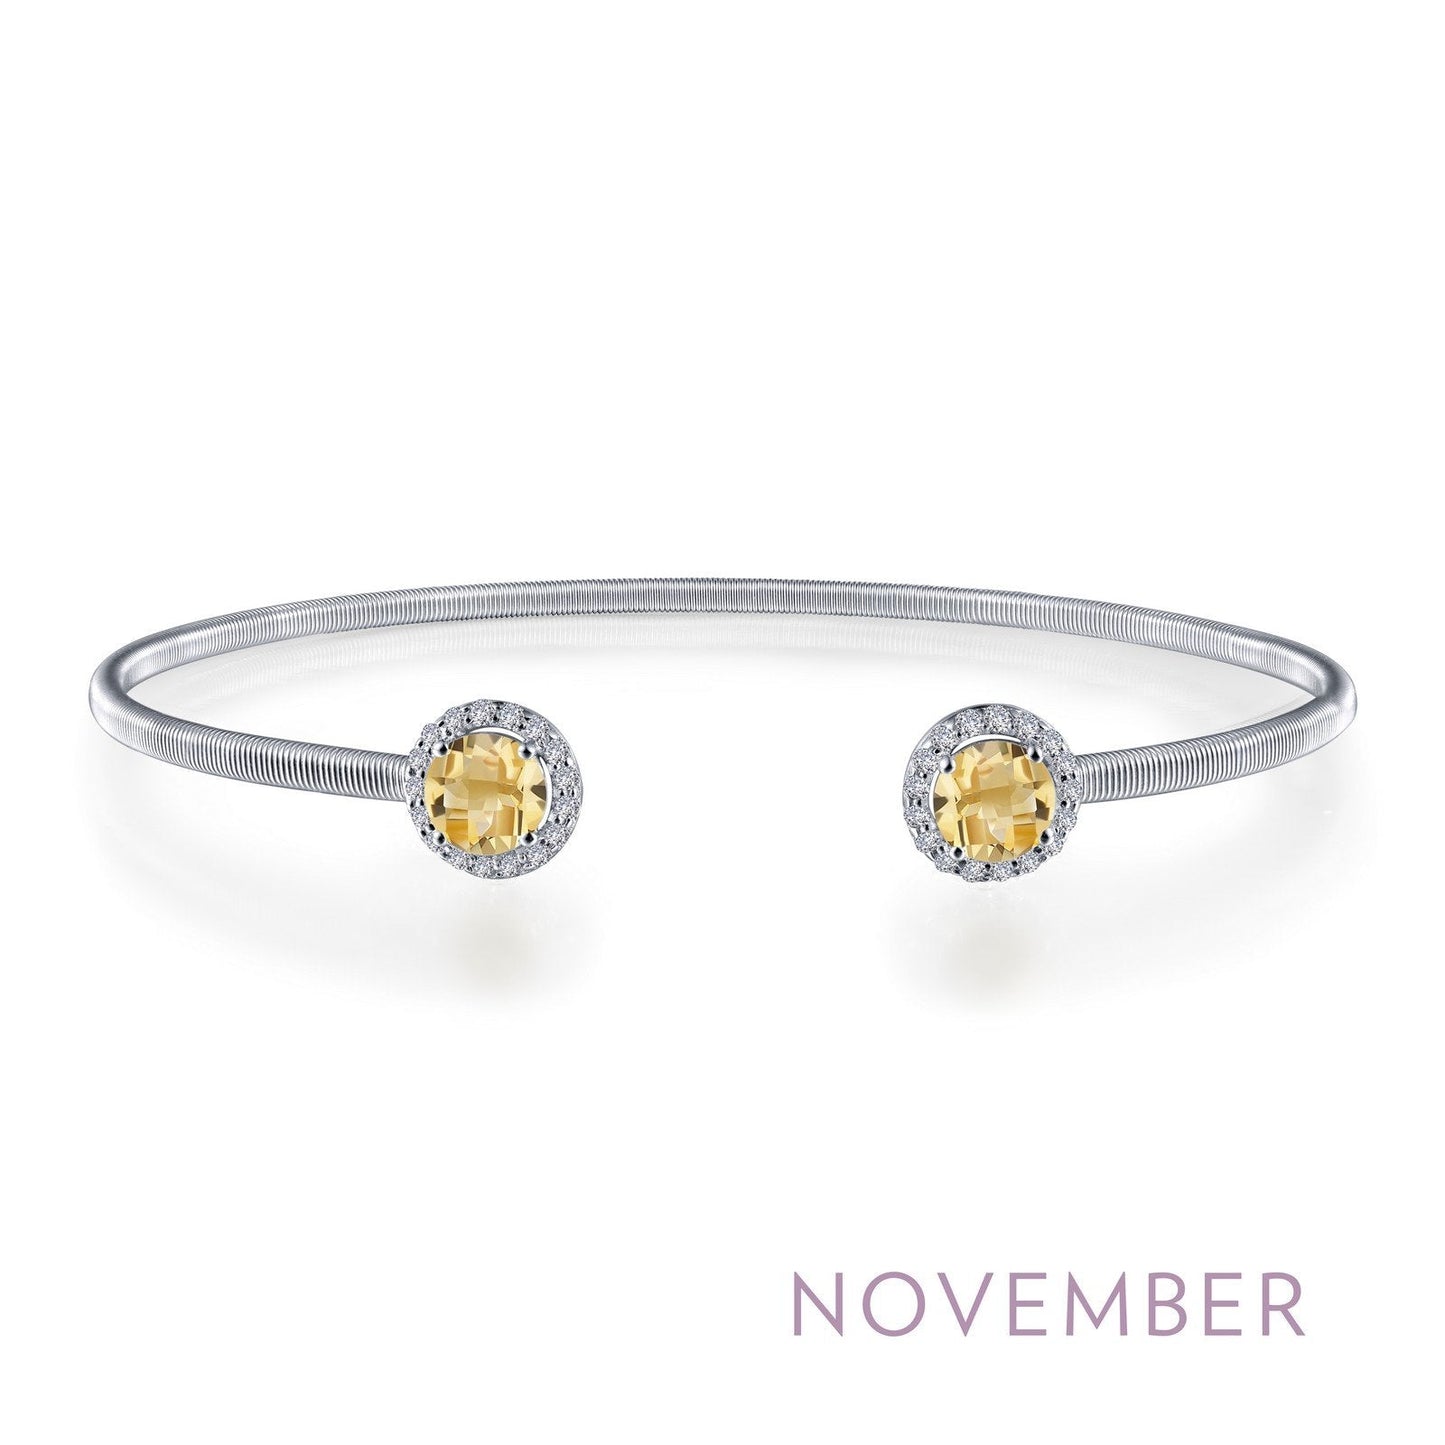 Load image into Gallery viewer, Lafonn November Birthstone Bracelet NOVEMBER BRACELETS Platinum Appx CTW: 1.26 cts. Citrine Appx 0.92 cts.  Lassaire simulated diamonds: 0.34 cts. CTS Width approx. 7.5mm
